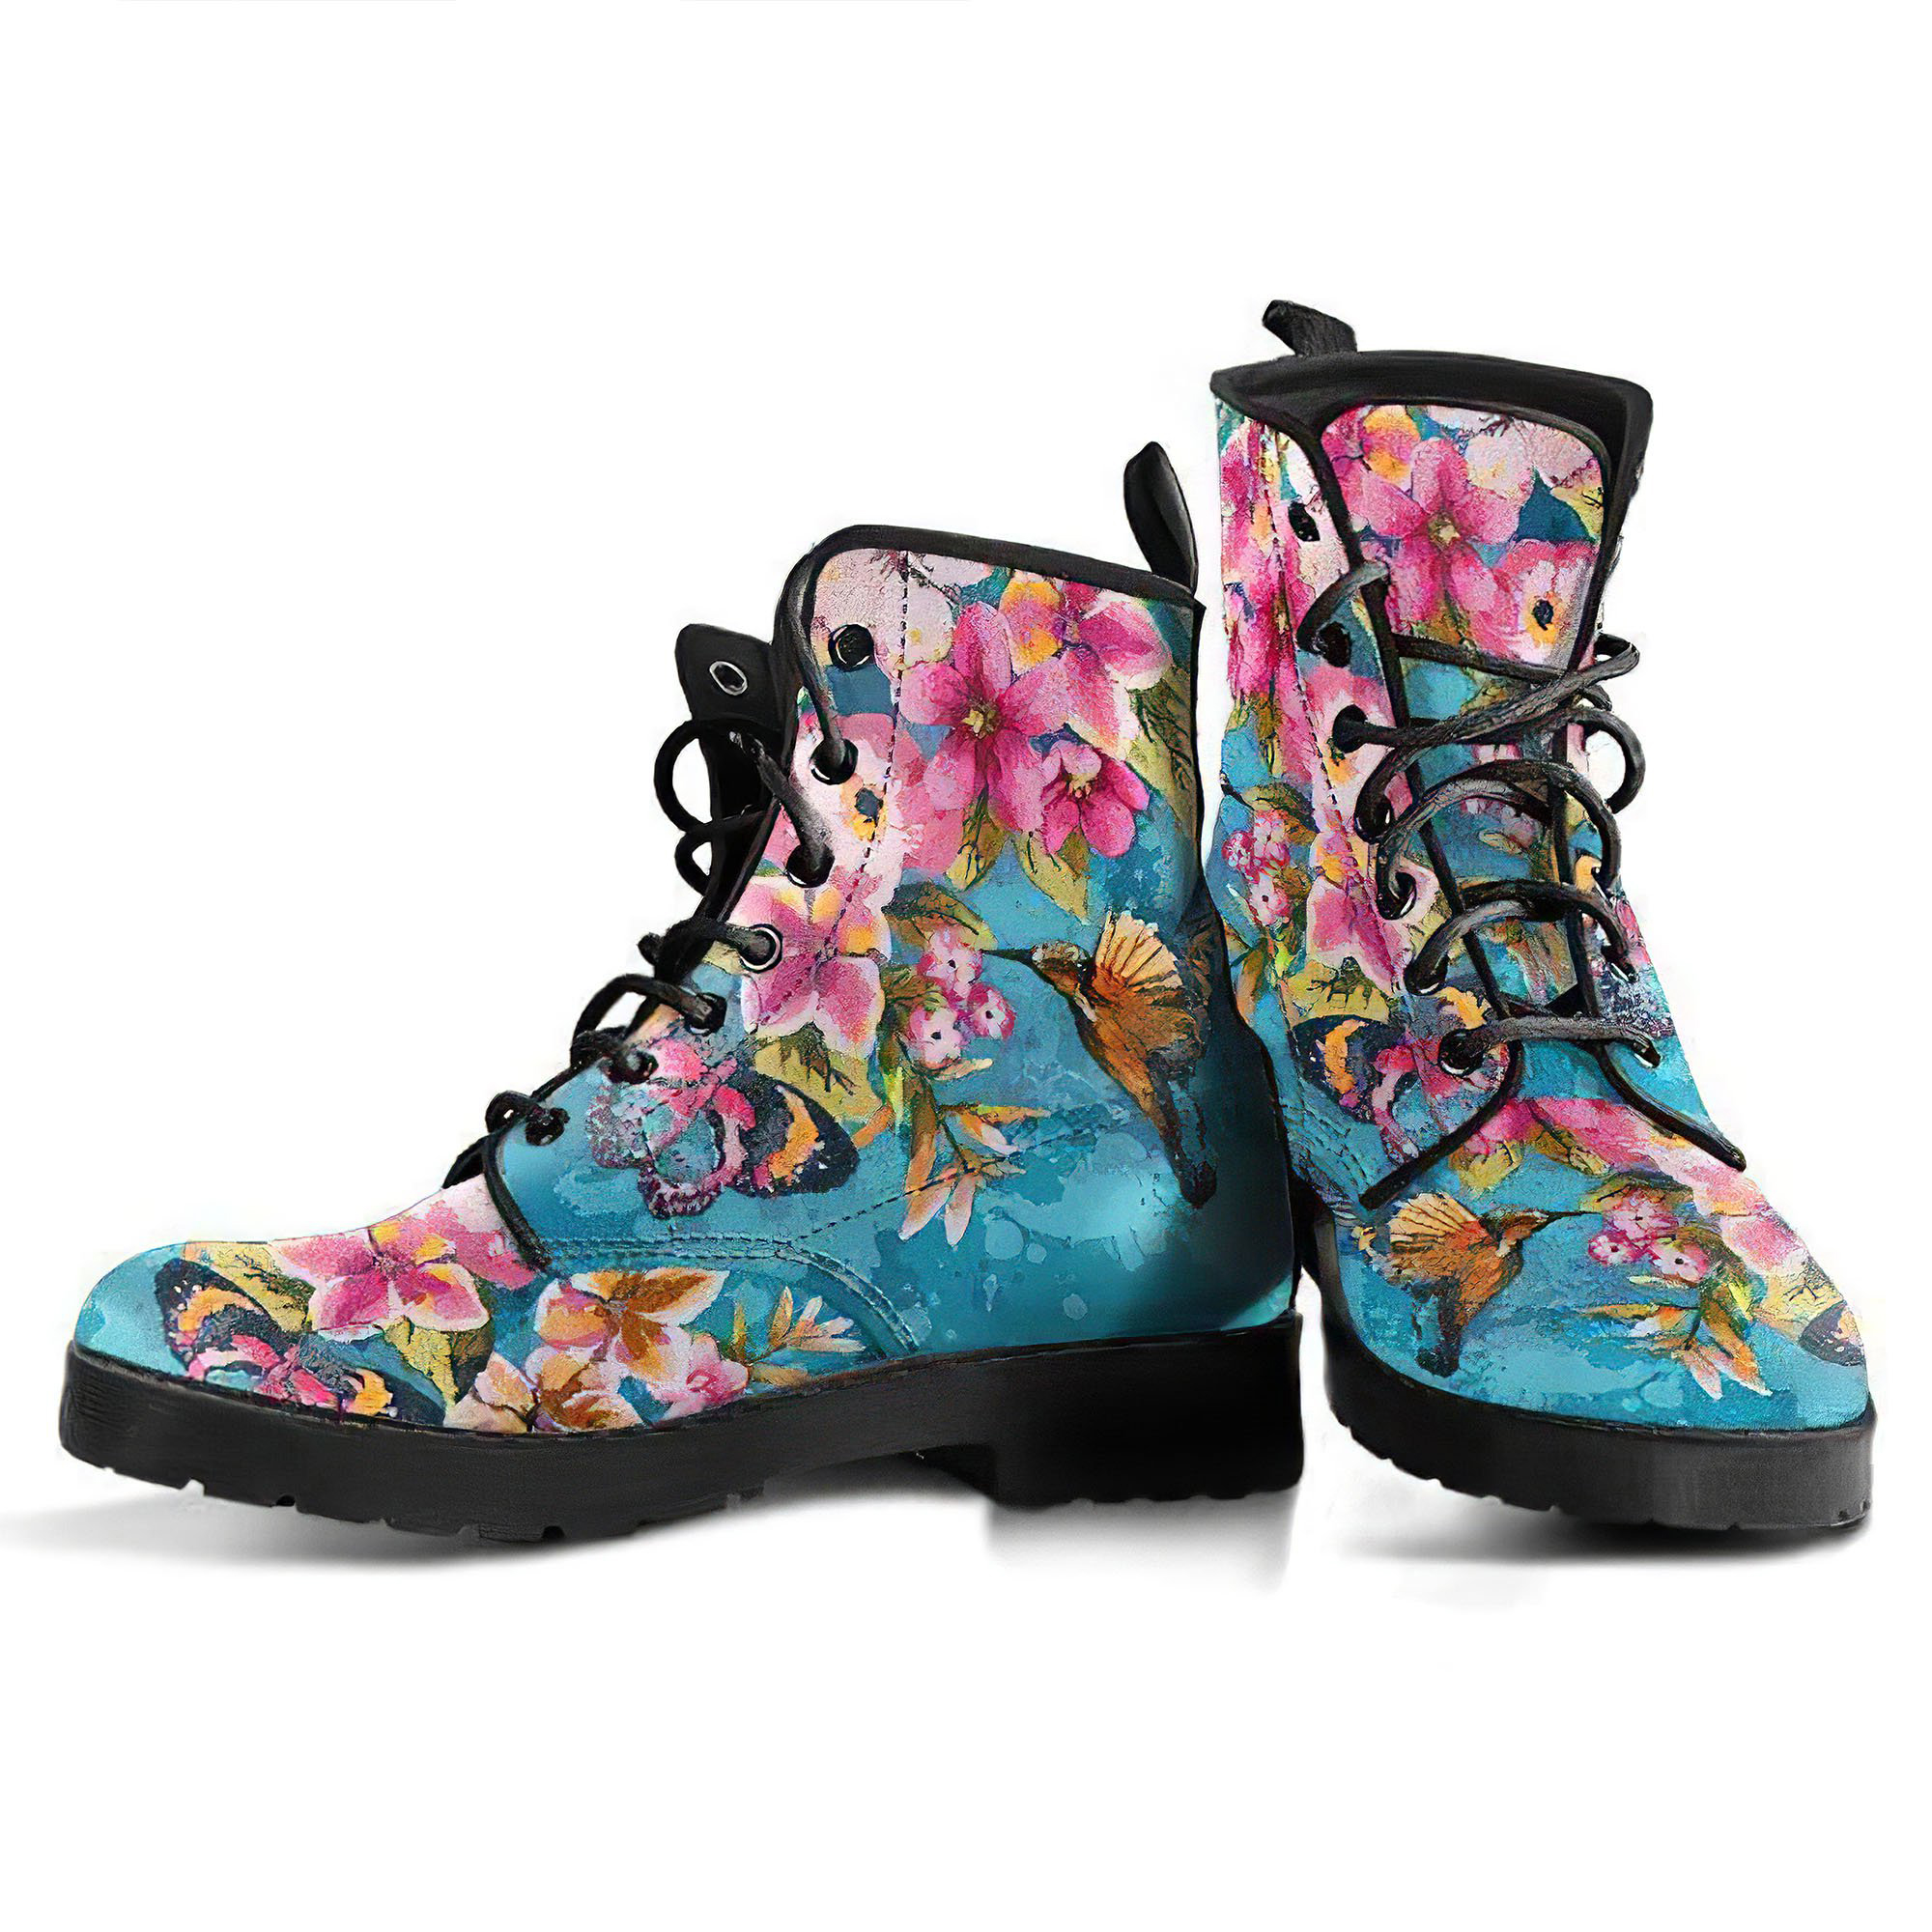 birds-and-flowers-handcrafted-boots-gp-main.jpg